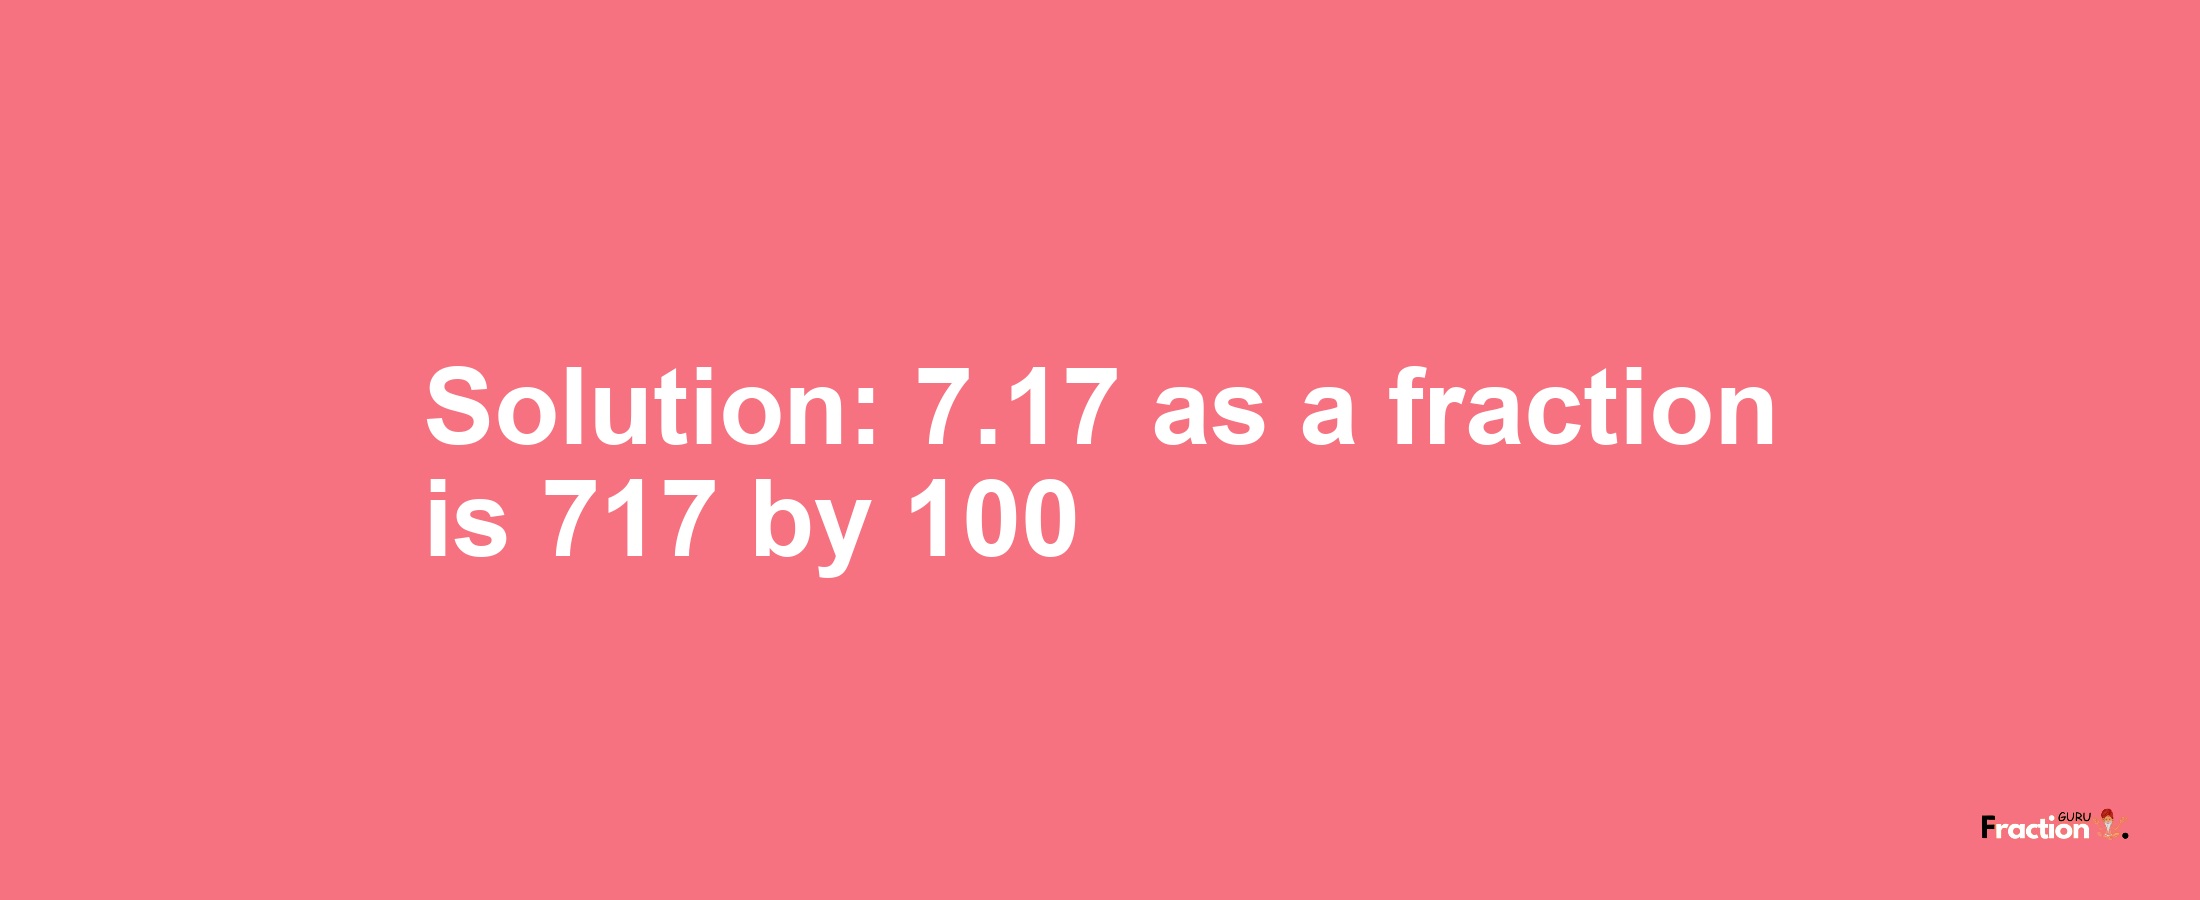 Solution:7.17 as a fraction is 717/100